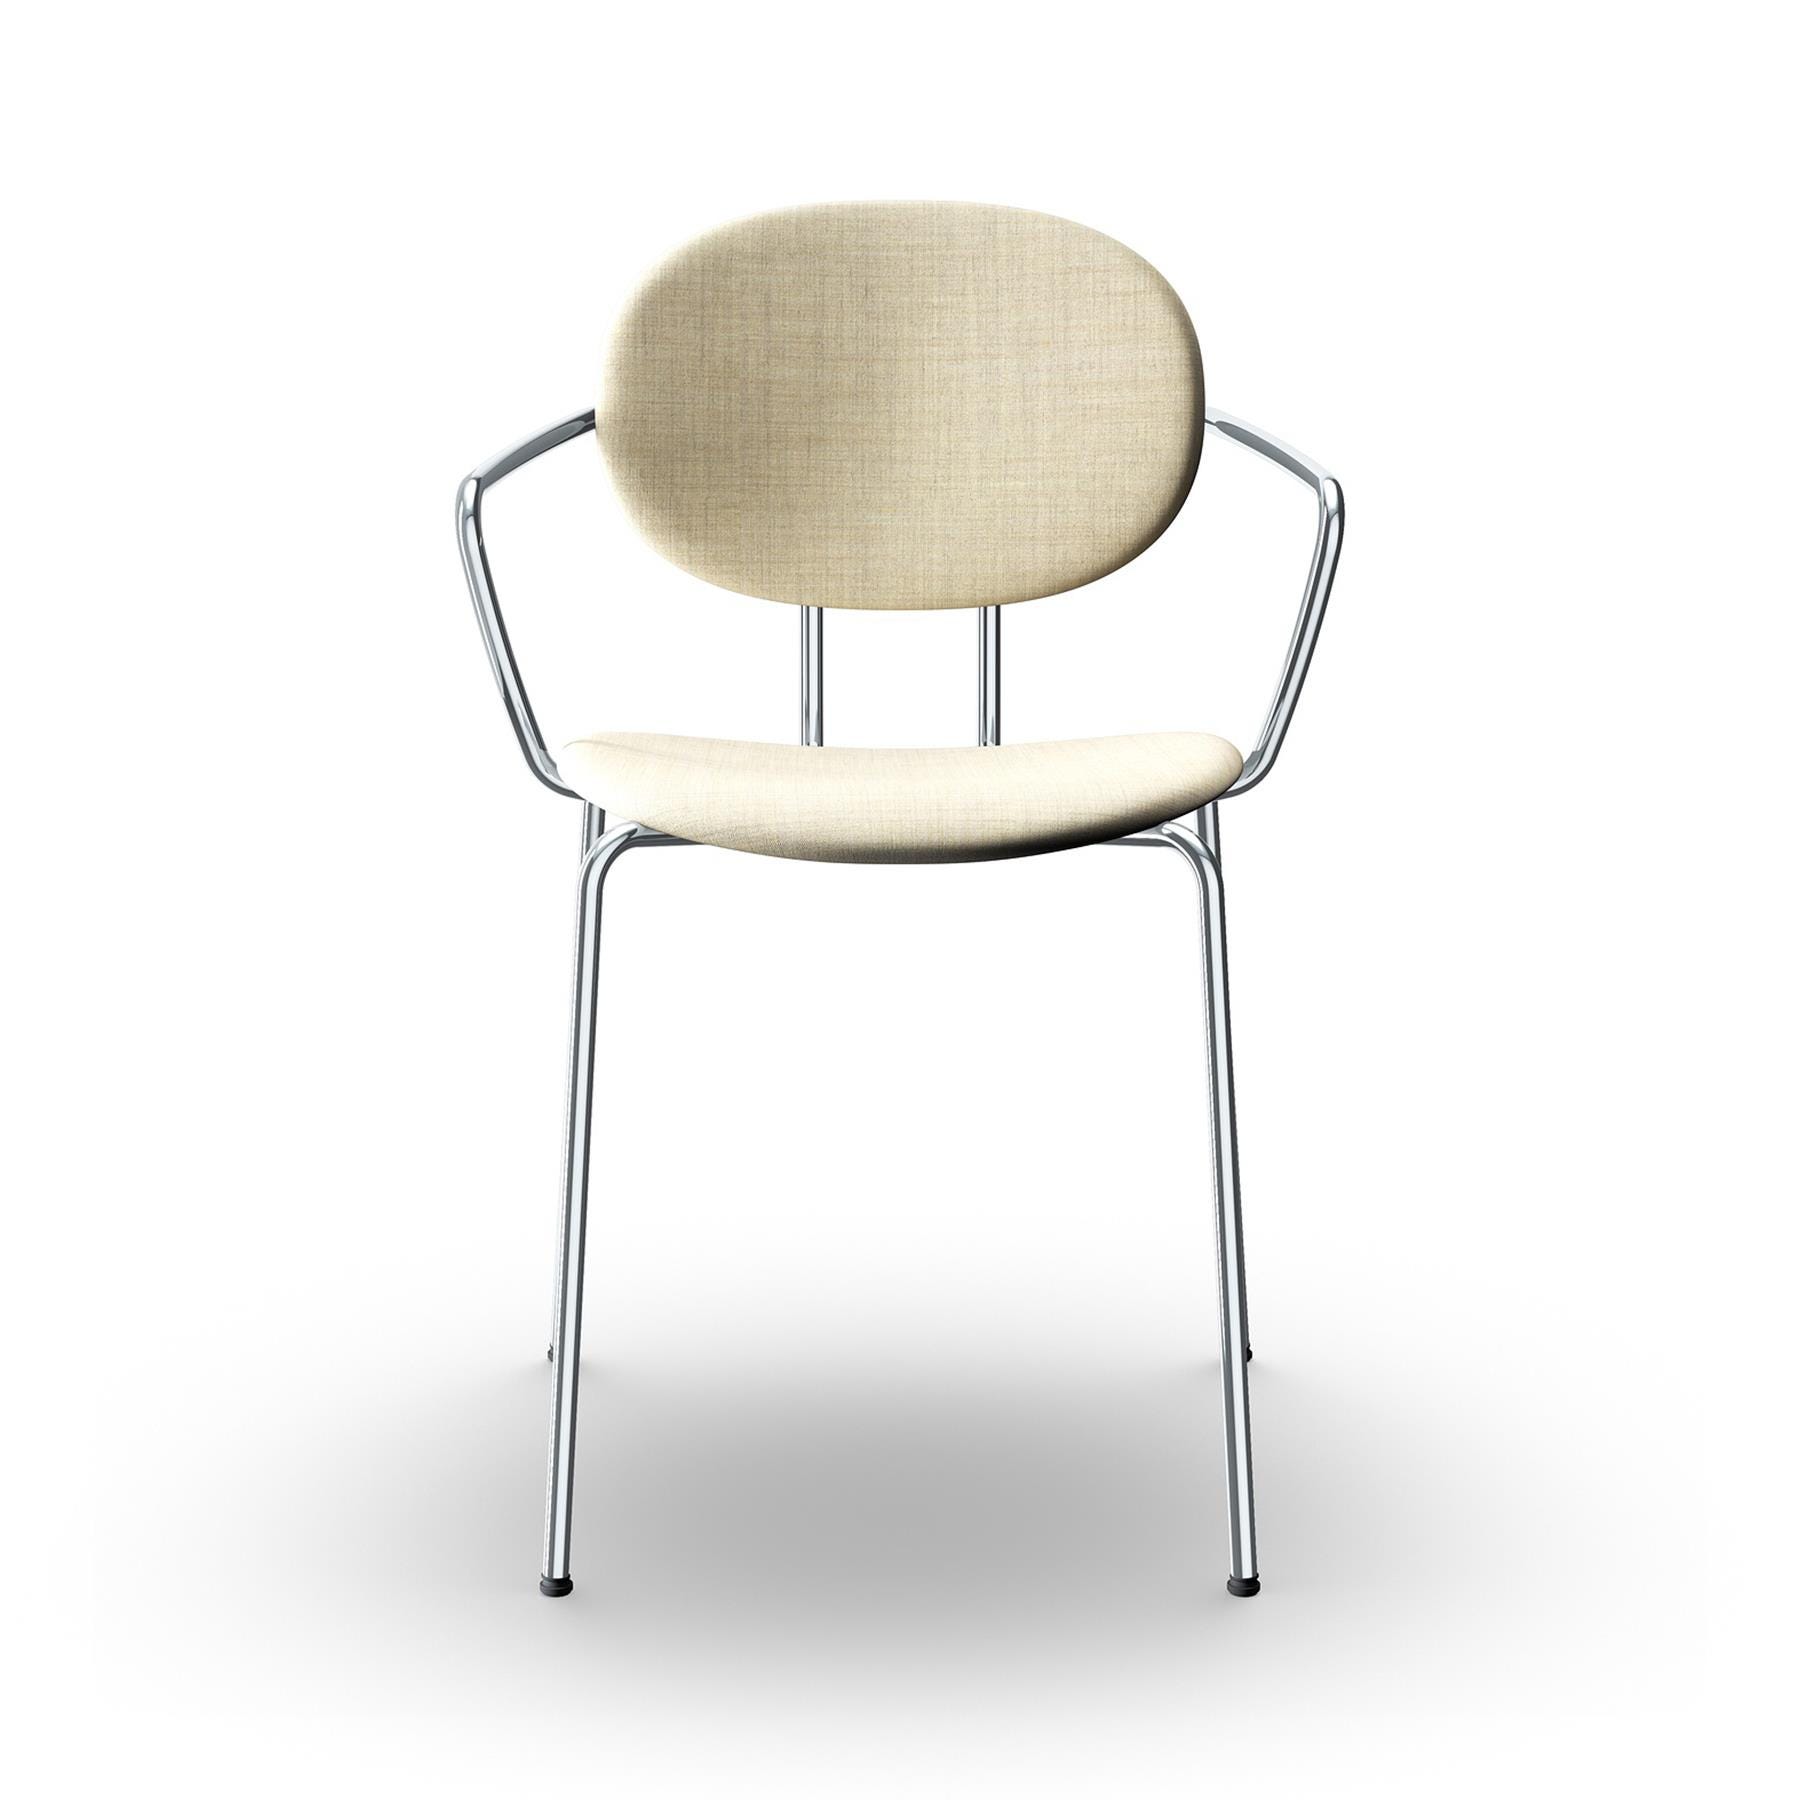 Sibast Piet Hein Dining Chair Fully Upholstered With Arms Chrome Remix 223 Cream Designer Furniture From Holloways Of Ludlow